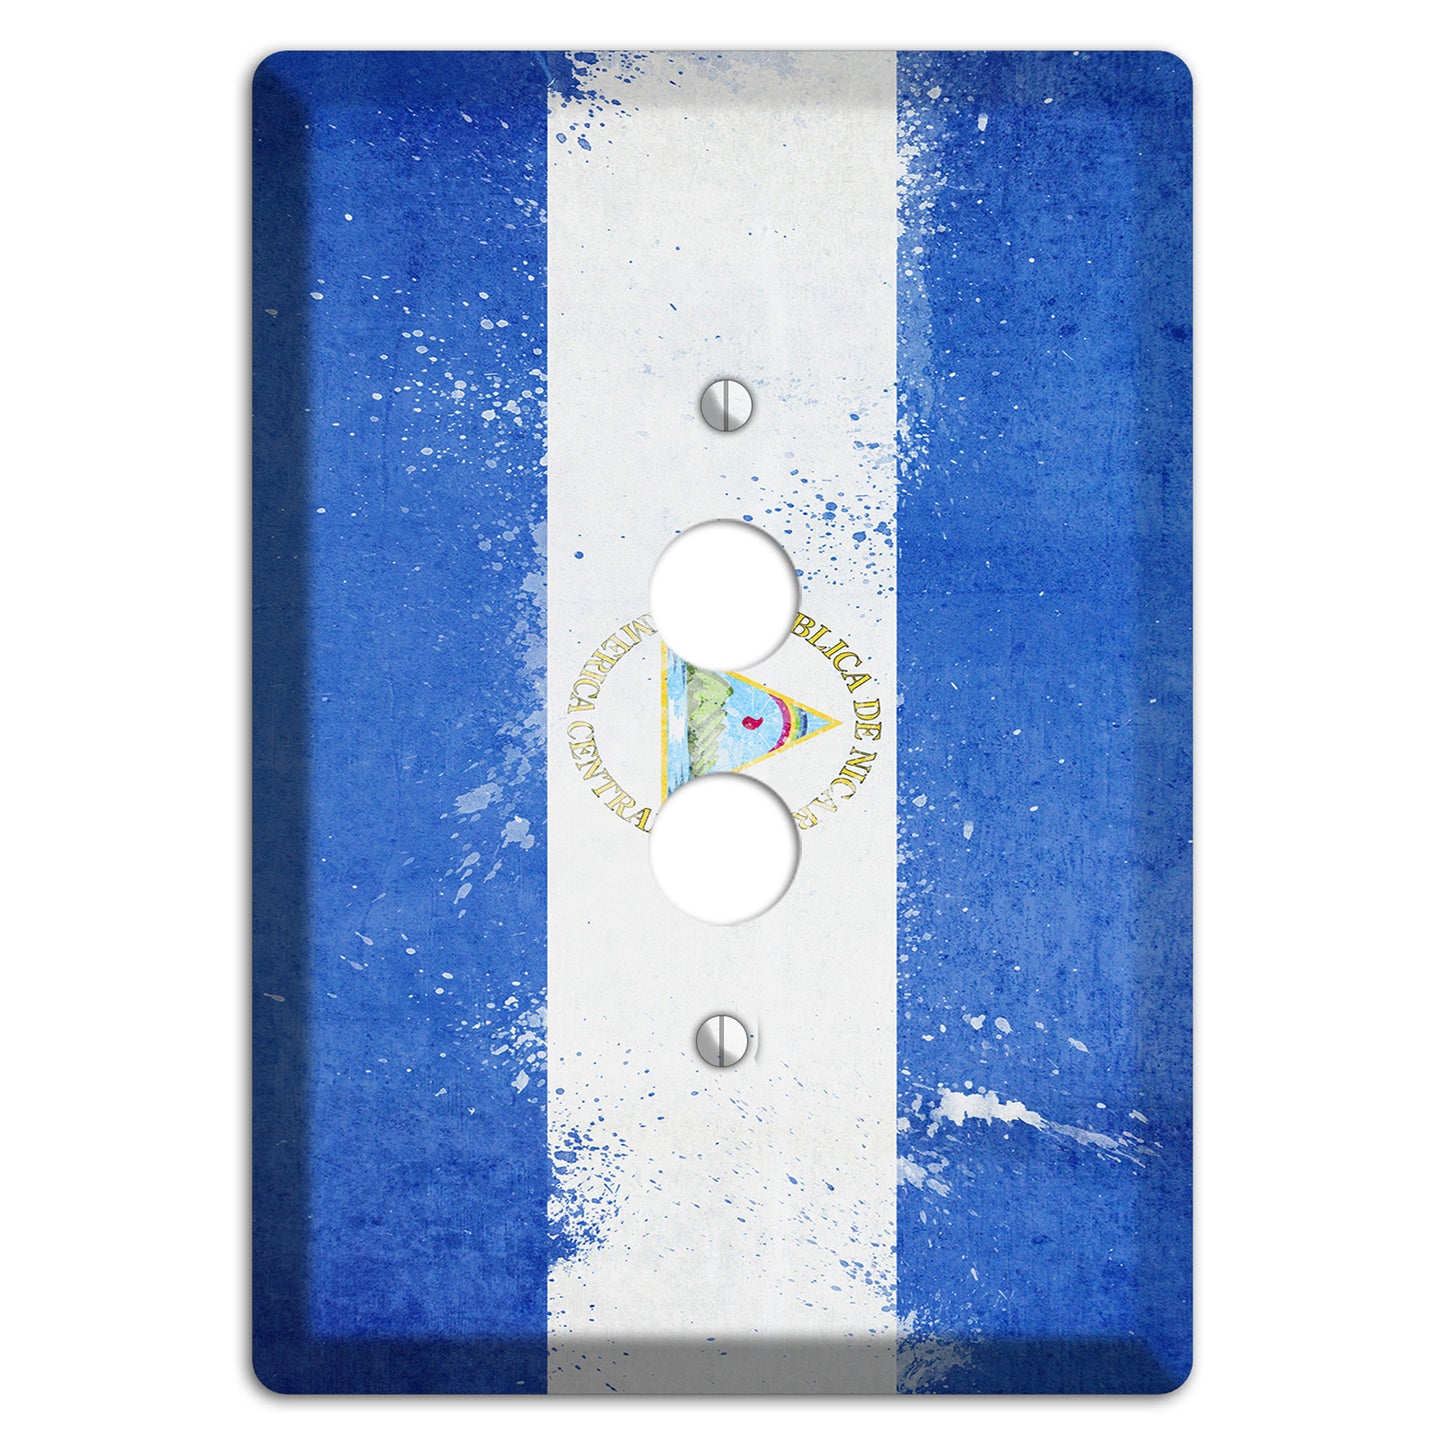 Nicaragua Cover Plates 1 Pushbutton Wallplate